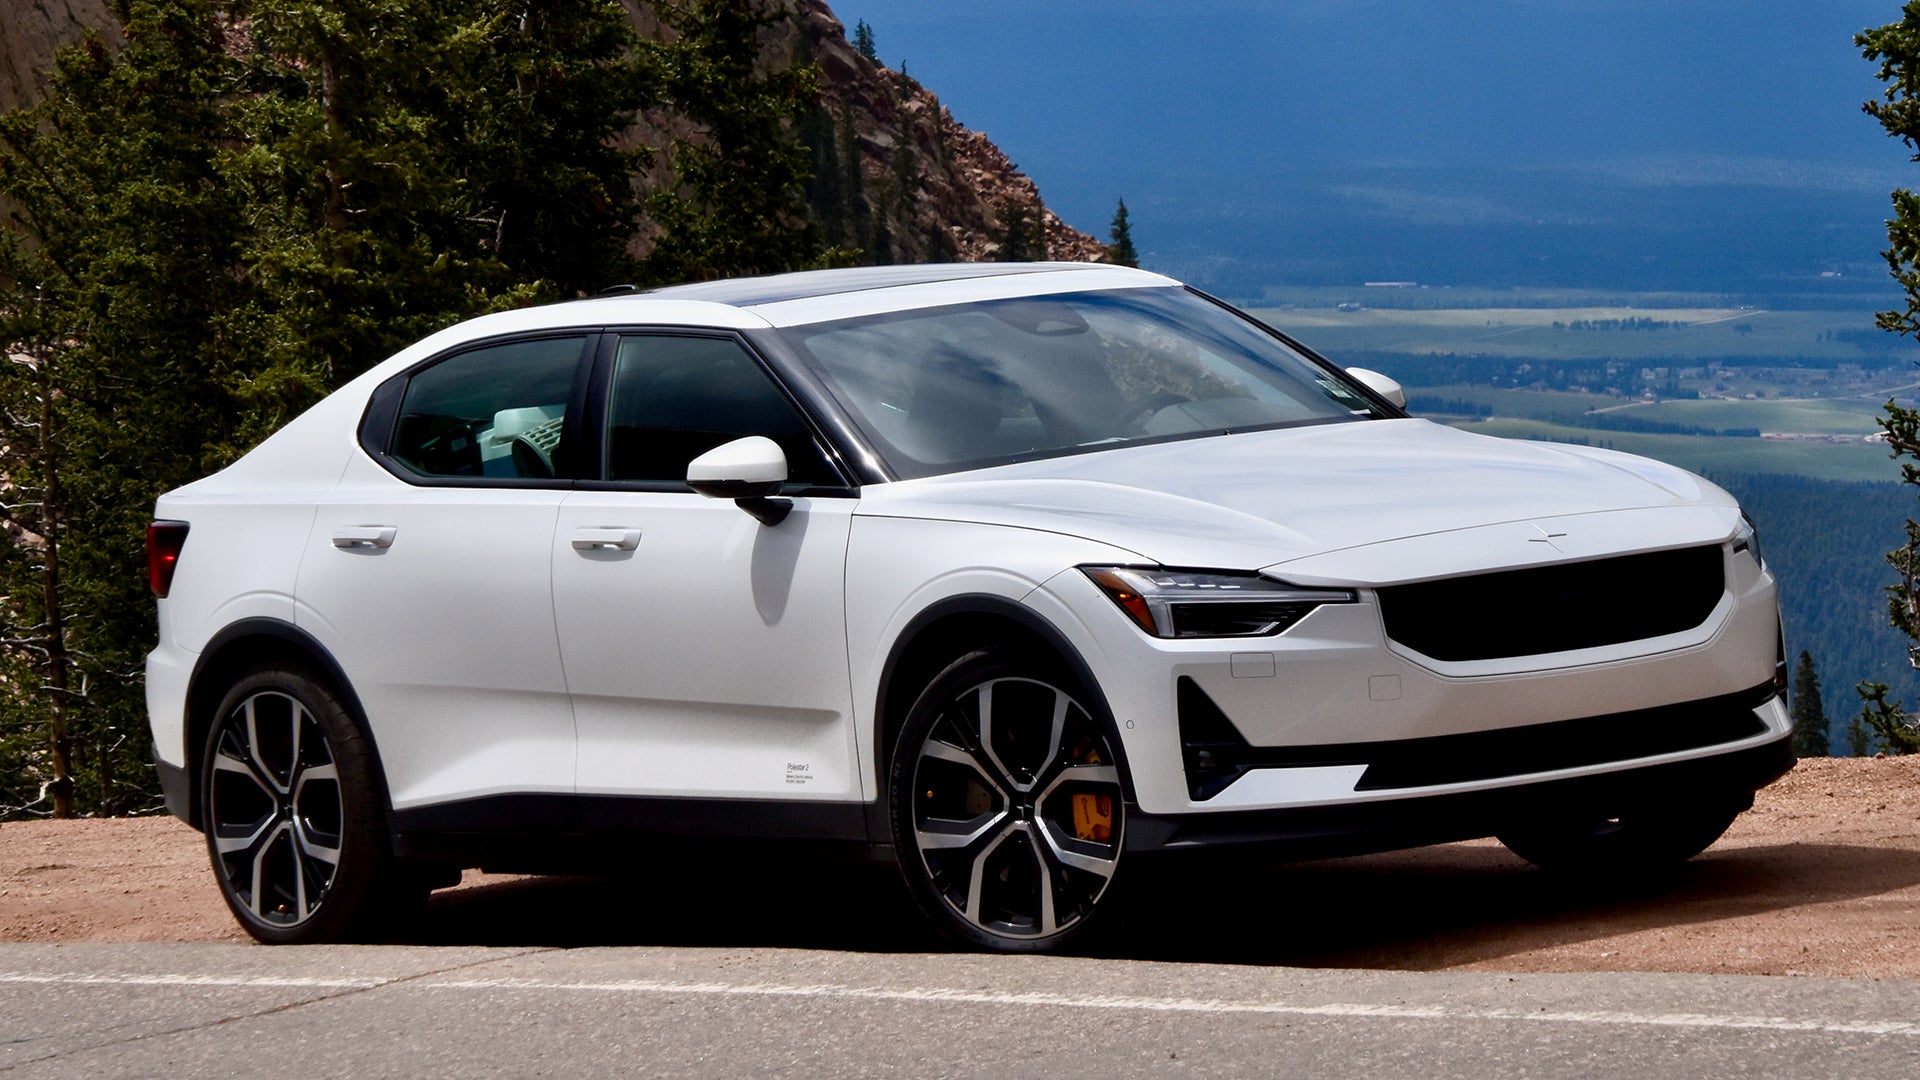 2021 Polestar 2 Review: A Solid EV That Doesn’t Overcomplicate It